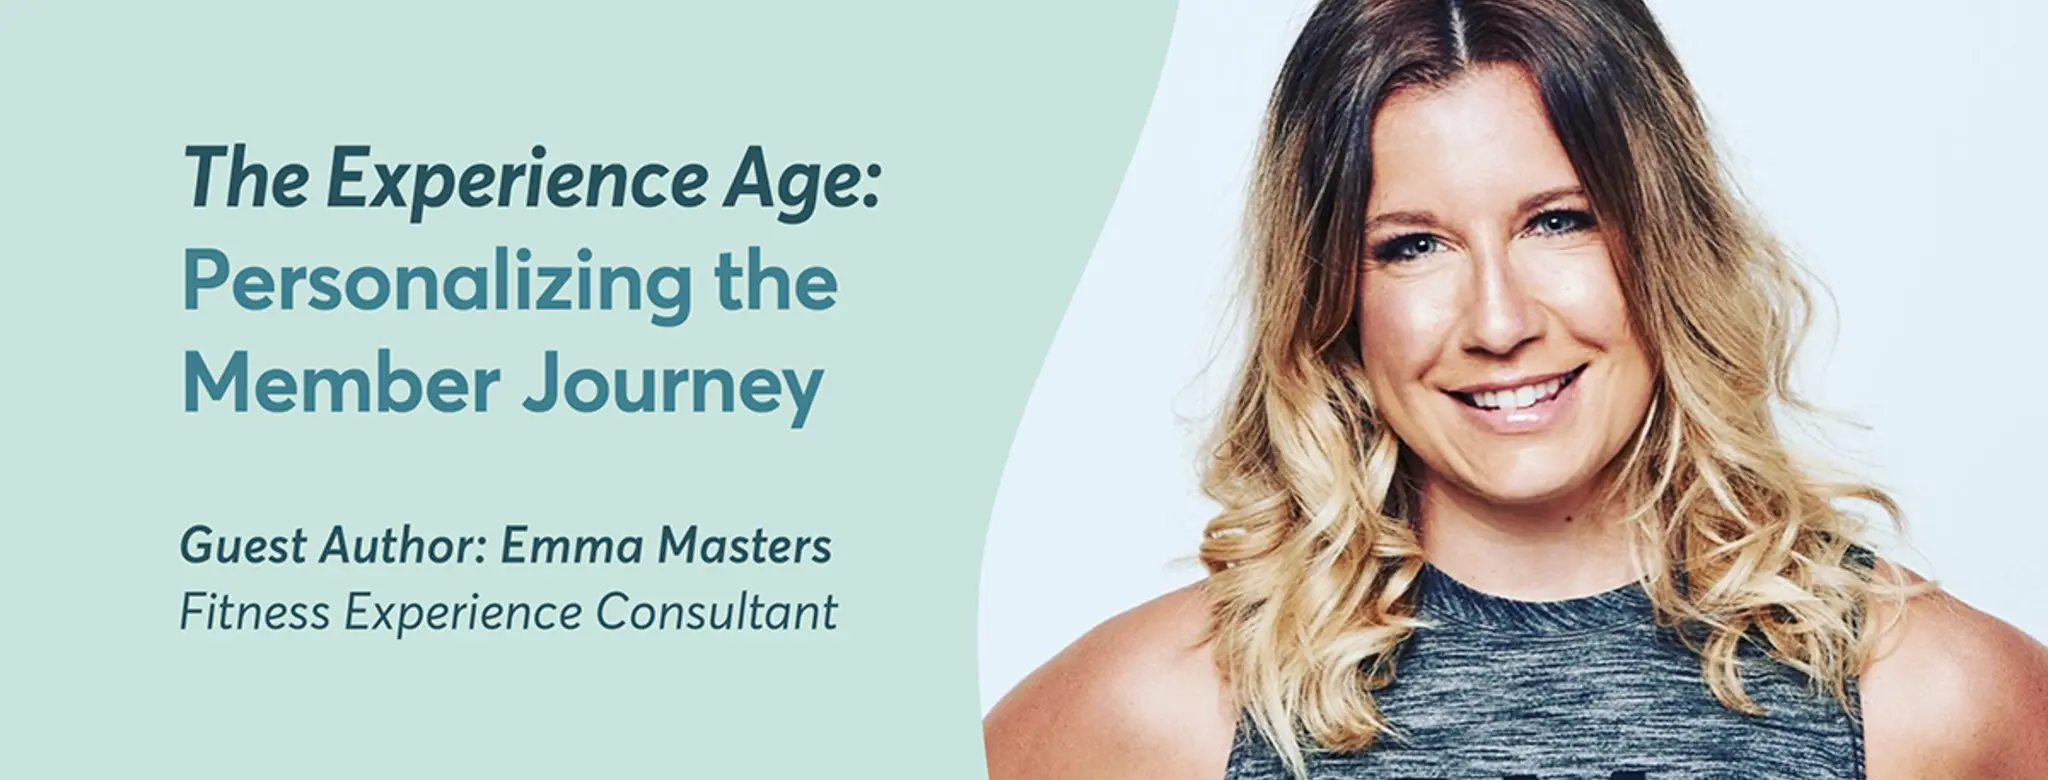 The Experience Age: Personalizing the Member Journey 